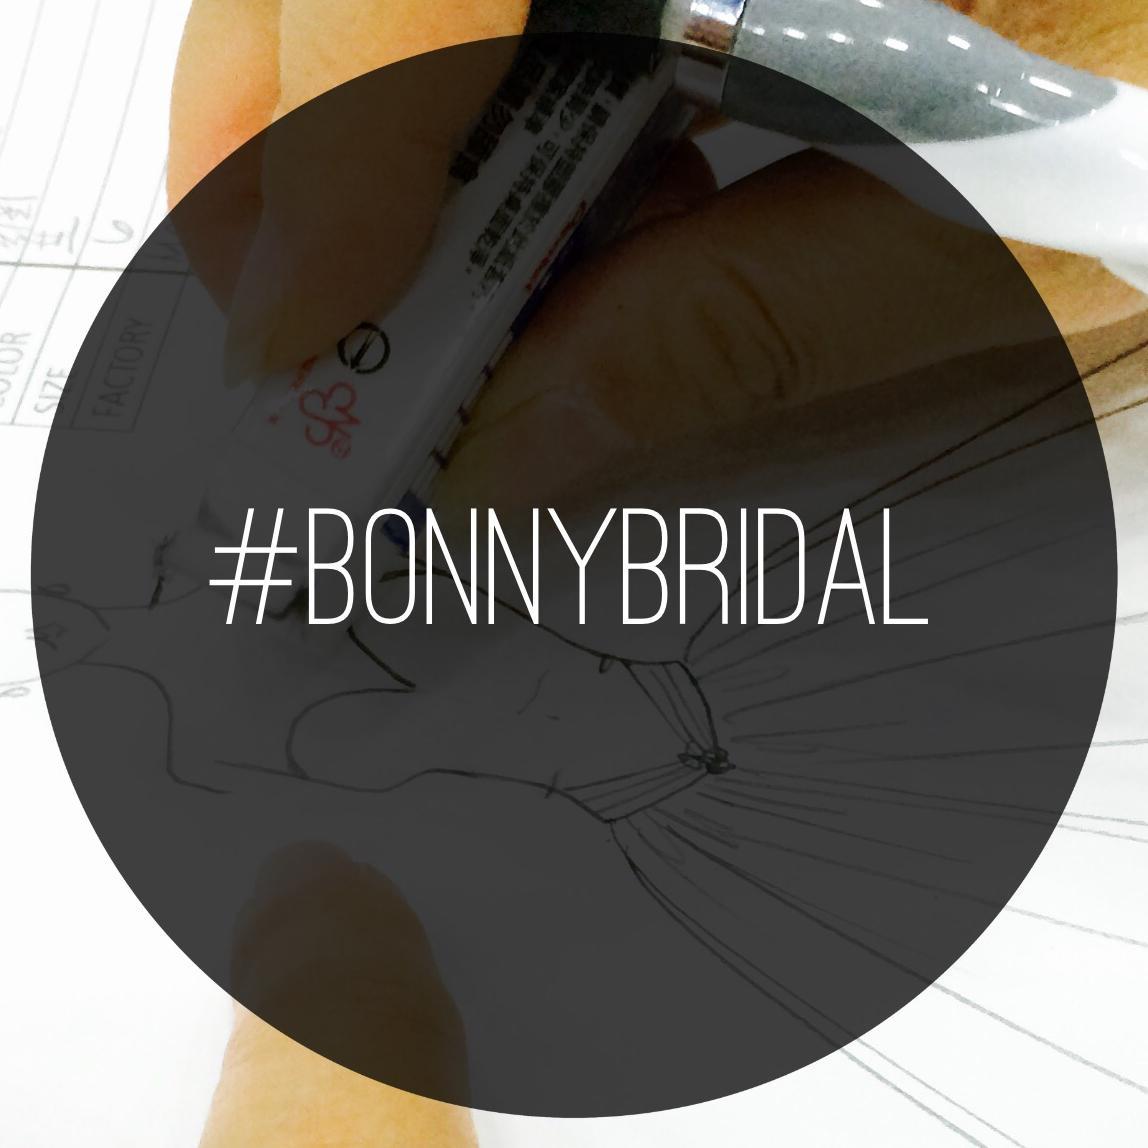 At Bonny, wedding dress designs are created with three essential elements in mind – style, romance, and tradition.